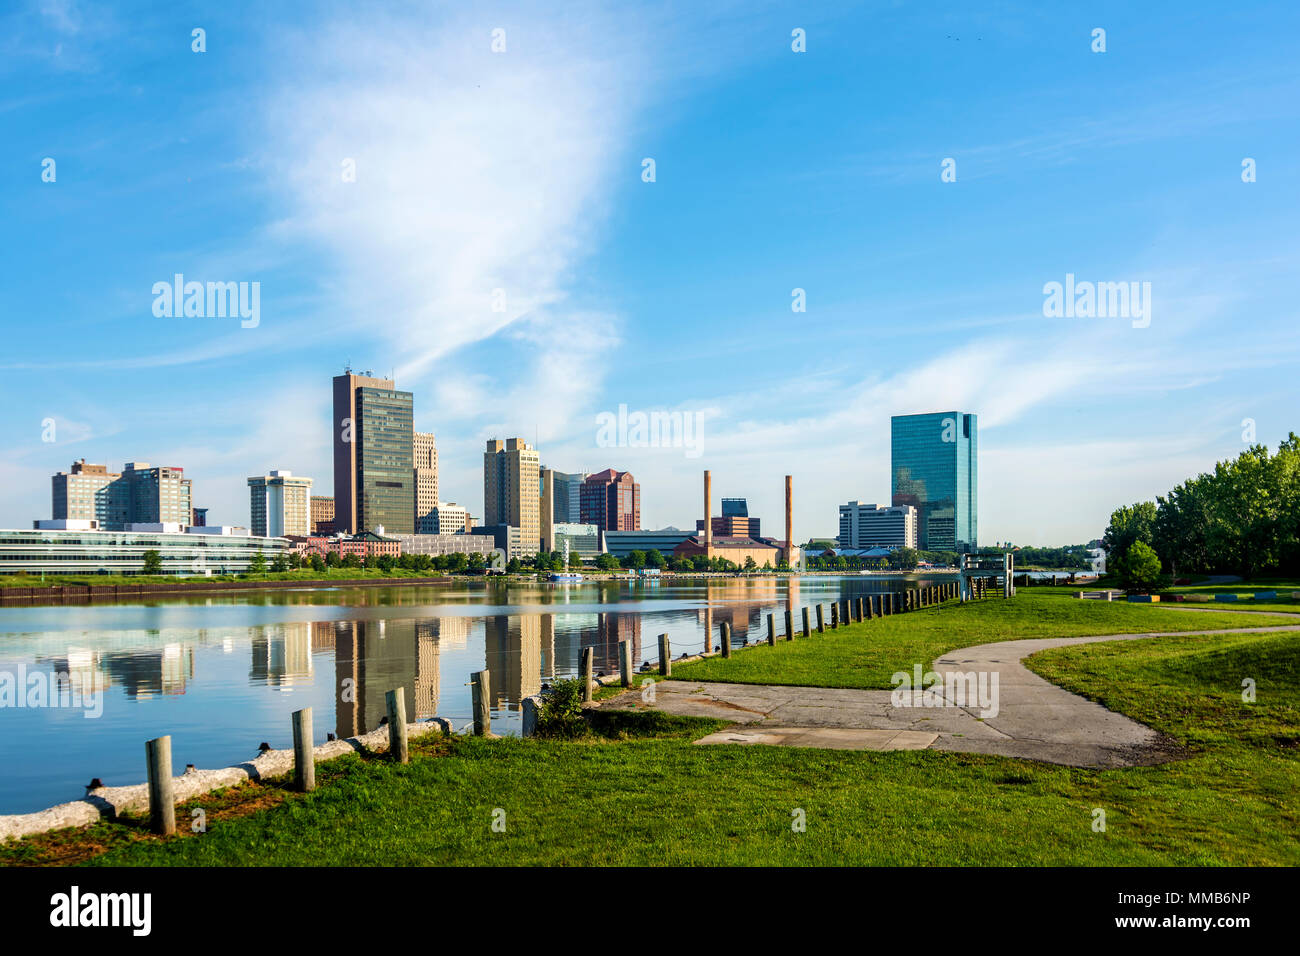 A panoramic view of downtown Toledo Ohio's skyline from across the Maumee River at a public park.  A beautiful blue sky reflecting in the river. Stock Photo